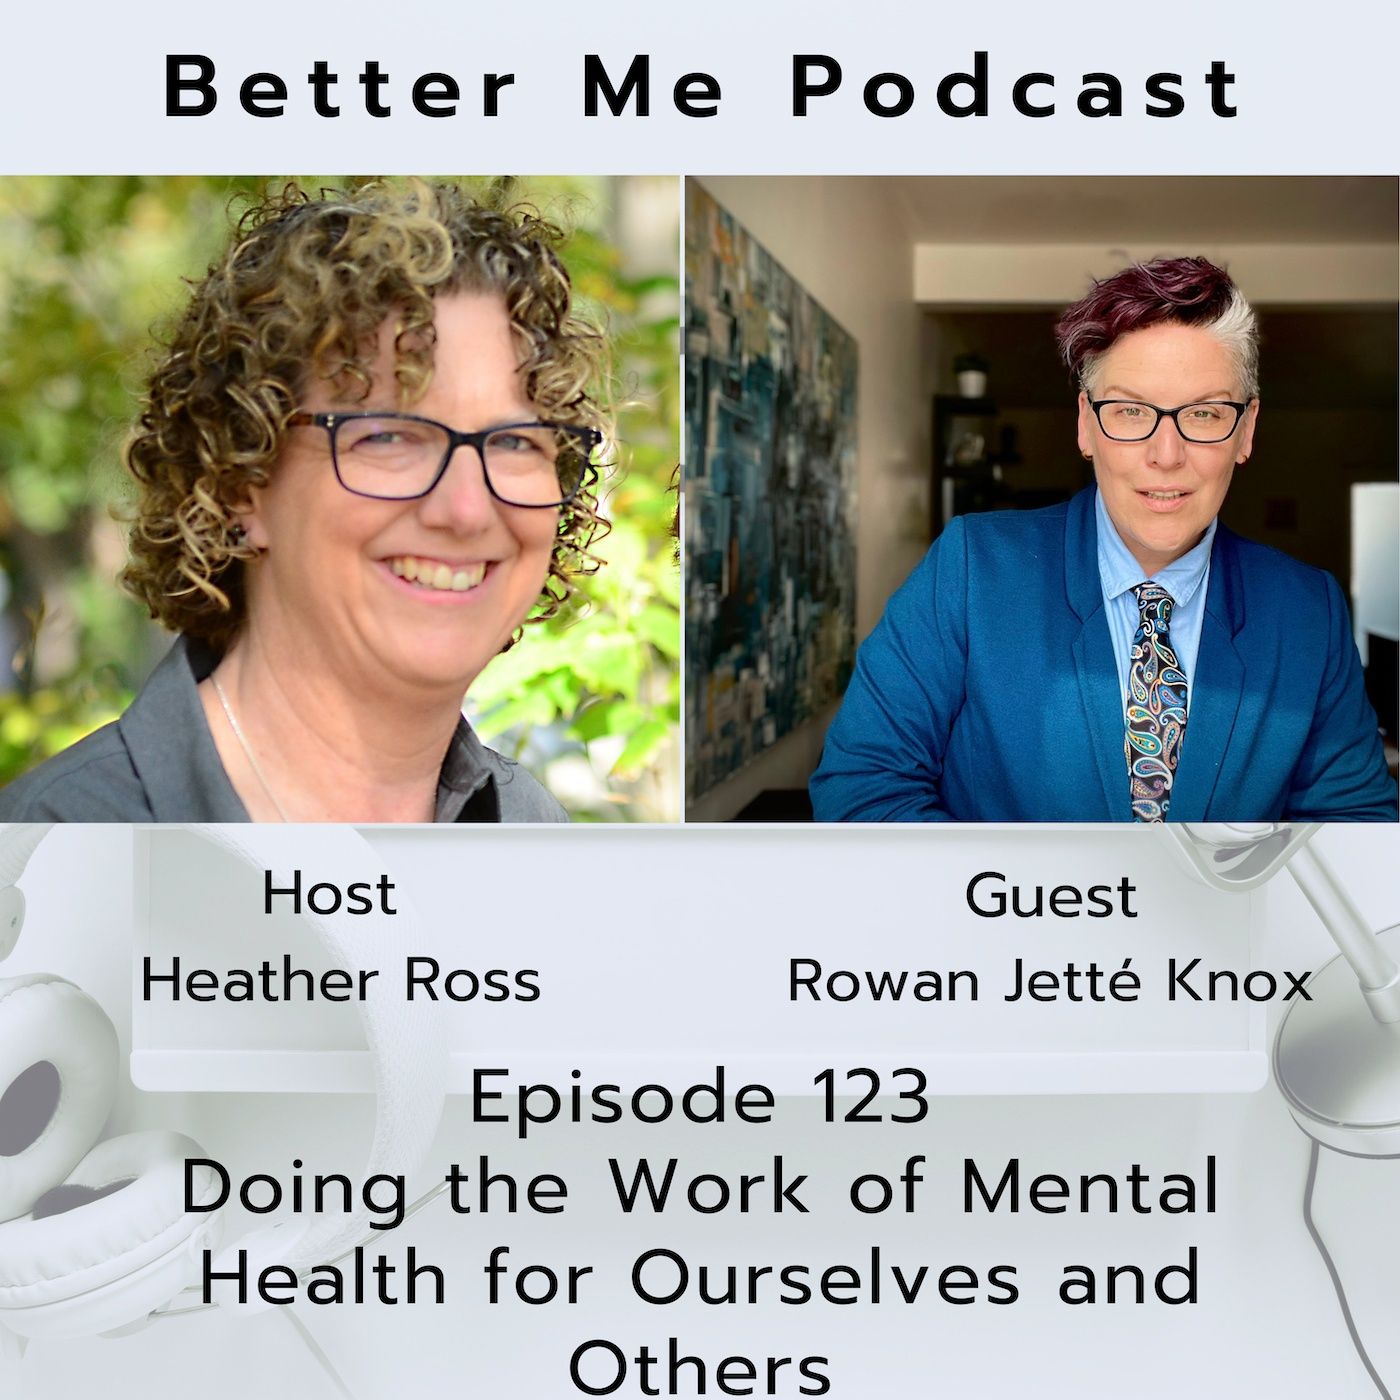 EP 123 Doing the Work of Mental Health for Ourselves and Others (with guest Rowan Jetté Knox)